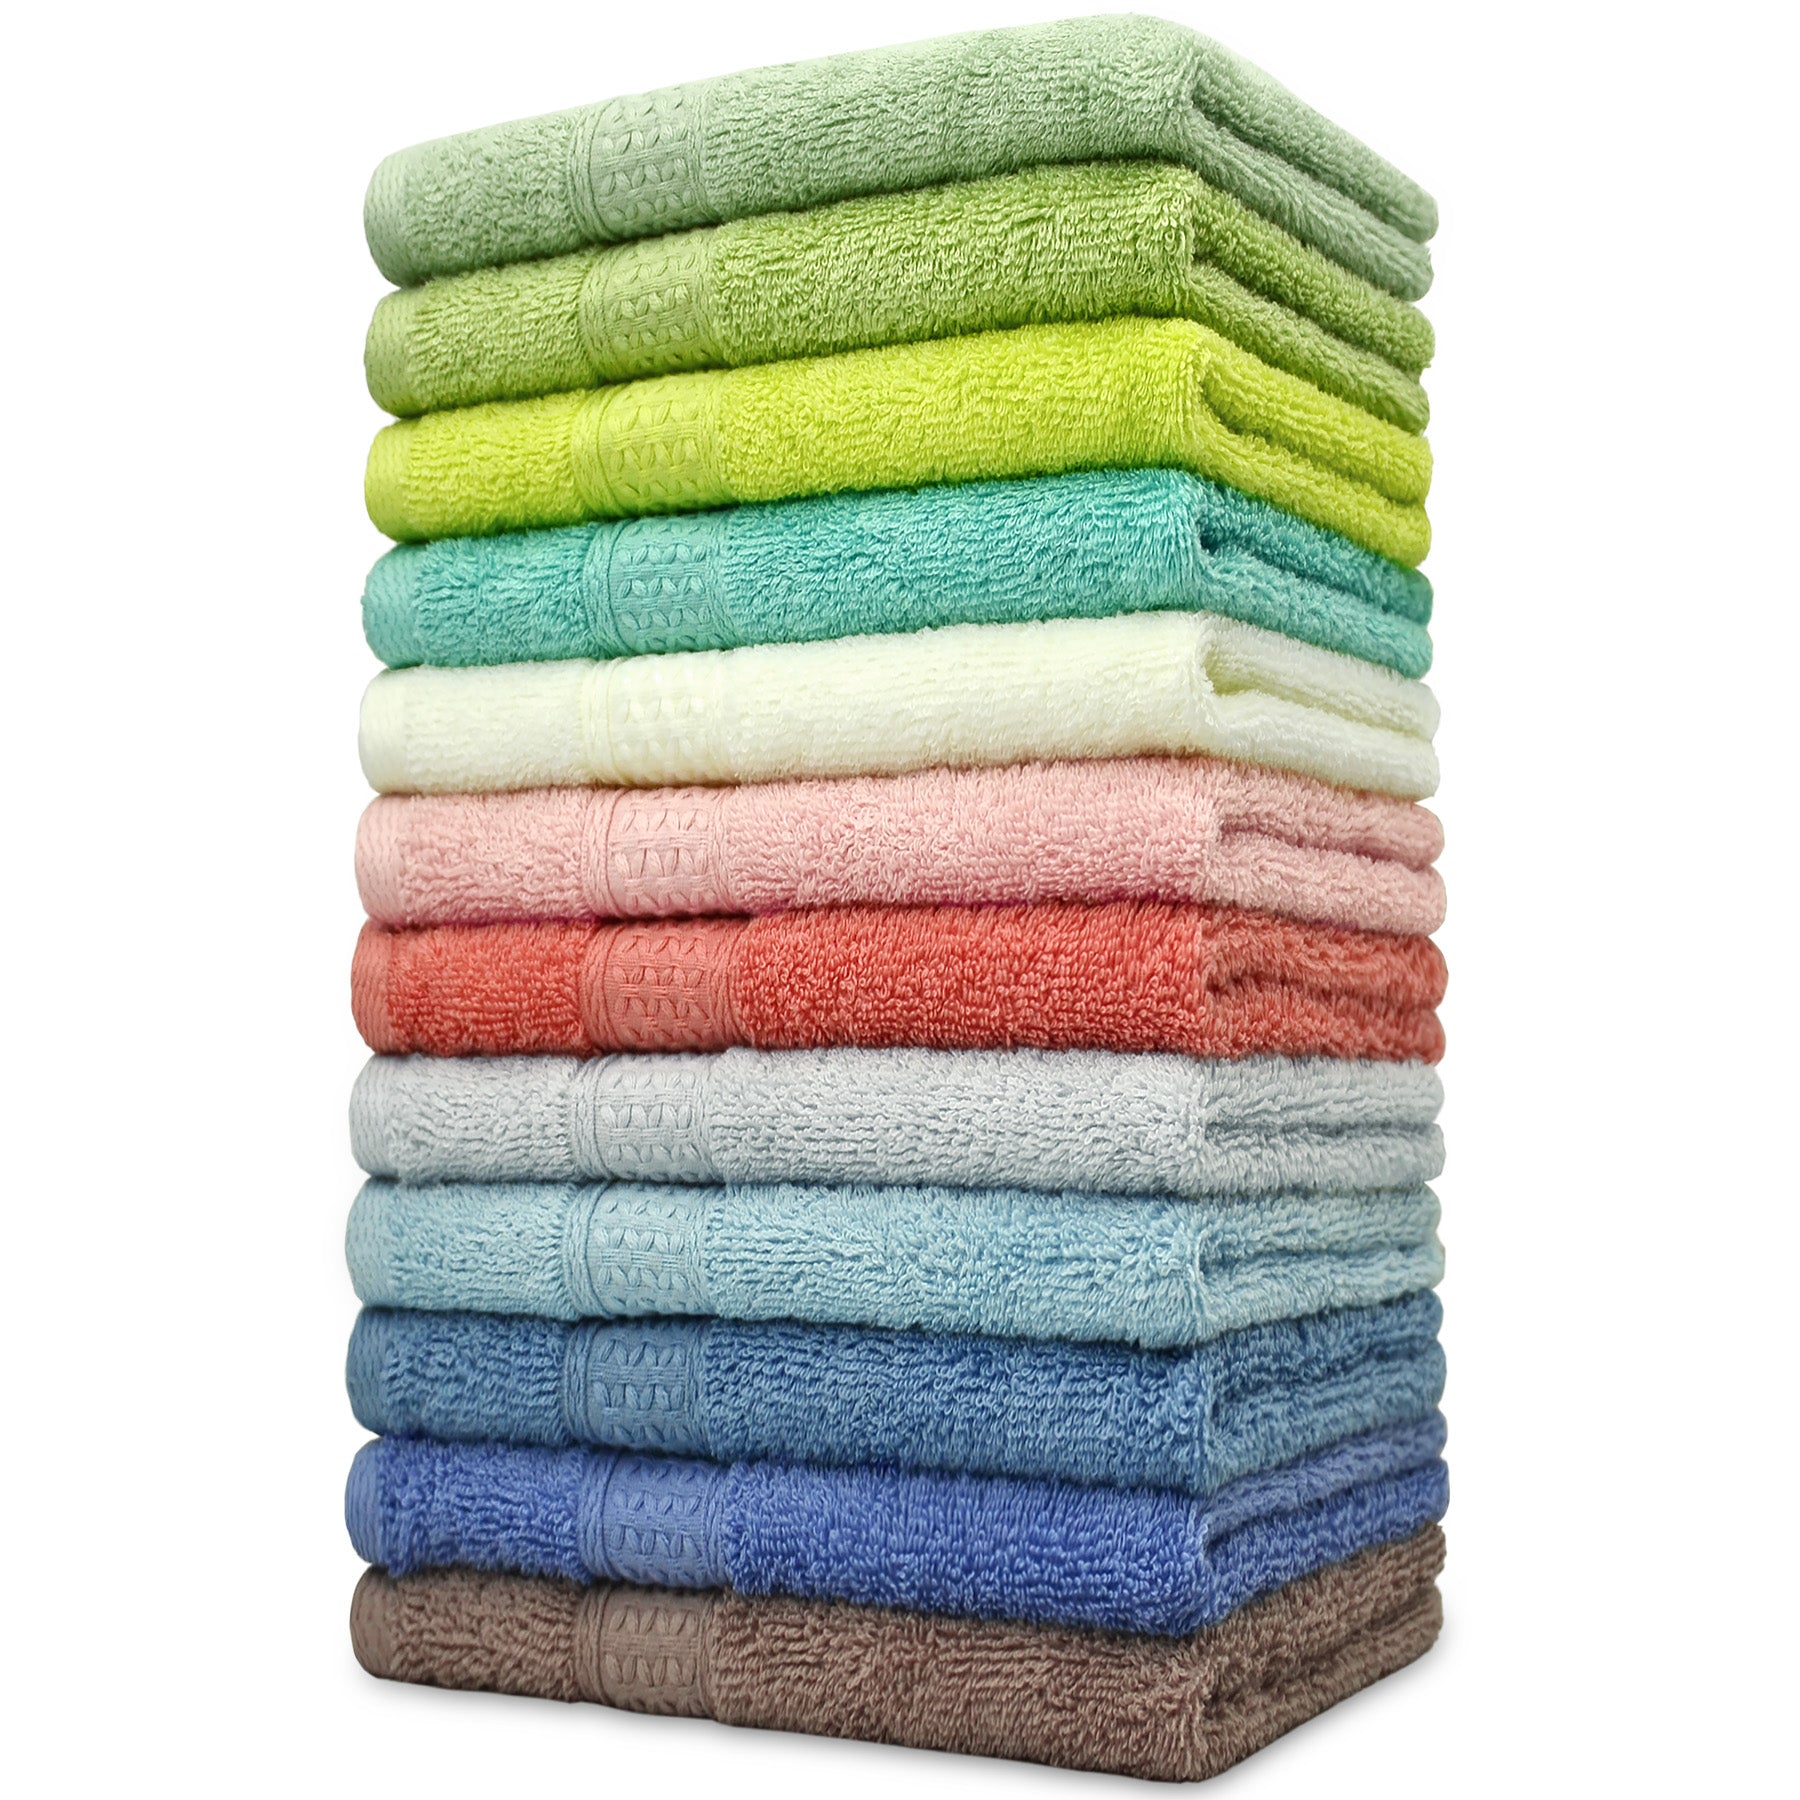 Cleanbear Hand Towels 12 Pack 12 Colors 100% Cotton Hand Towel Set for  Bathrooms and Different Family Members - Ultra Soft Bath Hand Towel with